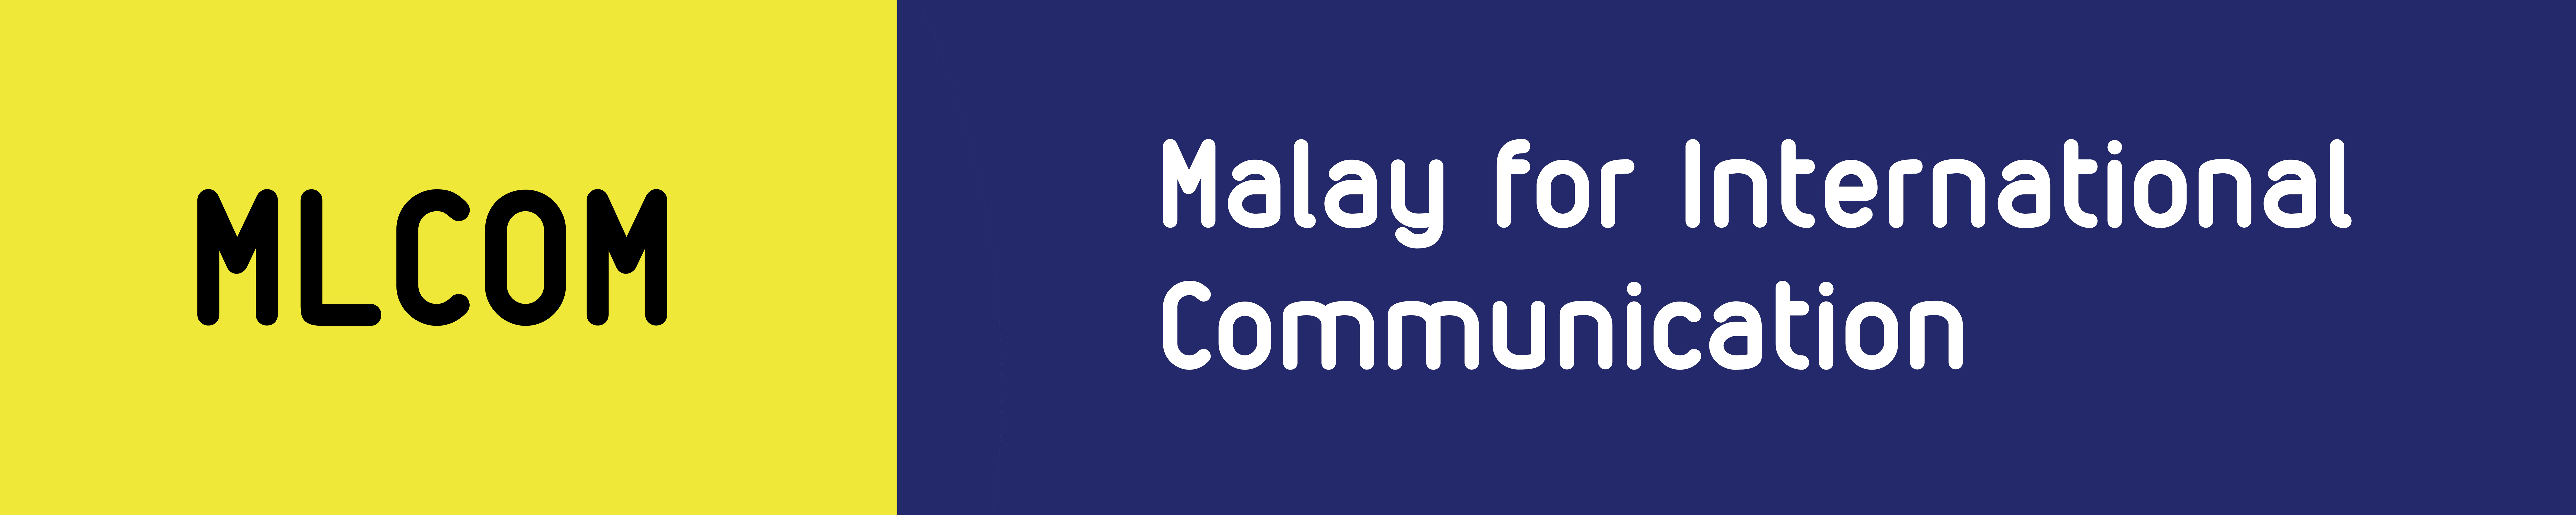 Bachelor Of Arts (Hons.) In Malay For International Communication